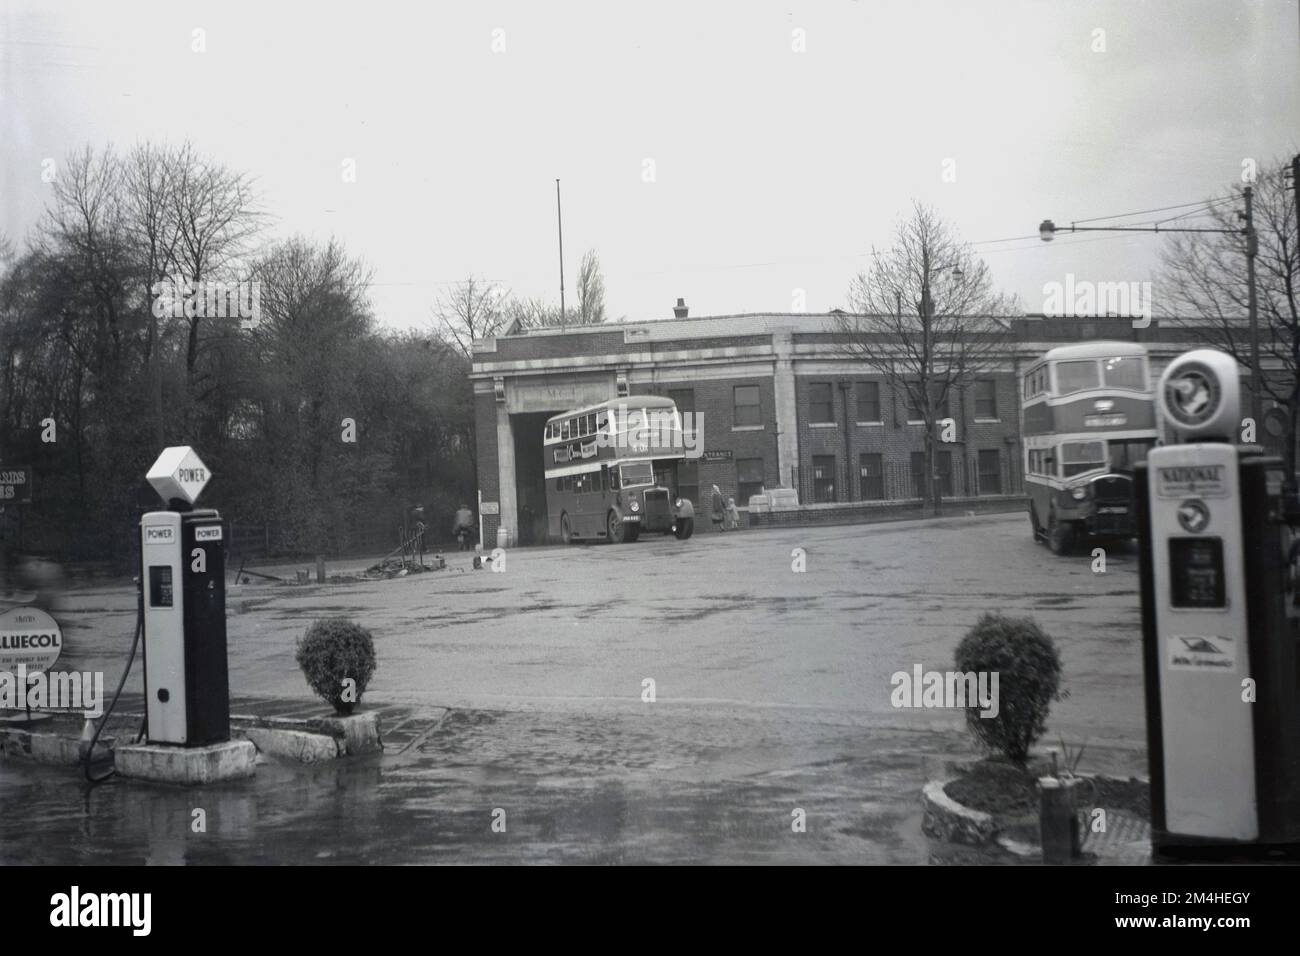 1950s, historical, view from the Hargood garage forecourt of the bus depot or terminus at Parrs Wood, Didsbury, Manchester, England, UK, with double-decker bus No 40x headed for Albert St. A sign for Smith's Bluecol, antifreeze can be seen, as can petrol pumps for fuel brands of the era, Power and National. Stock Photo